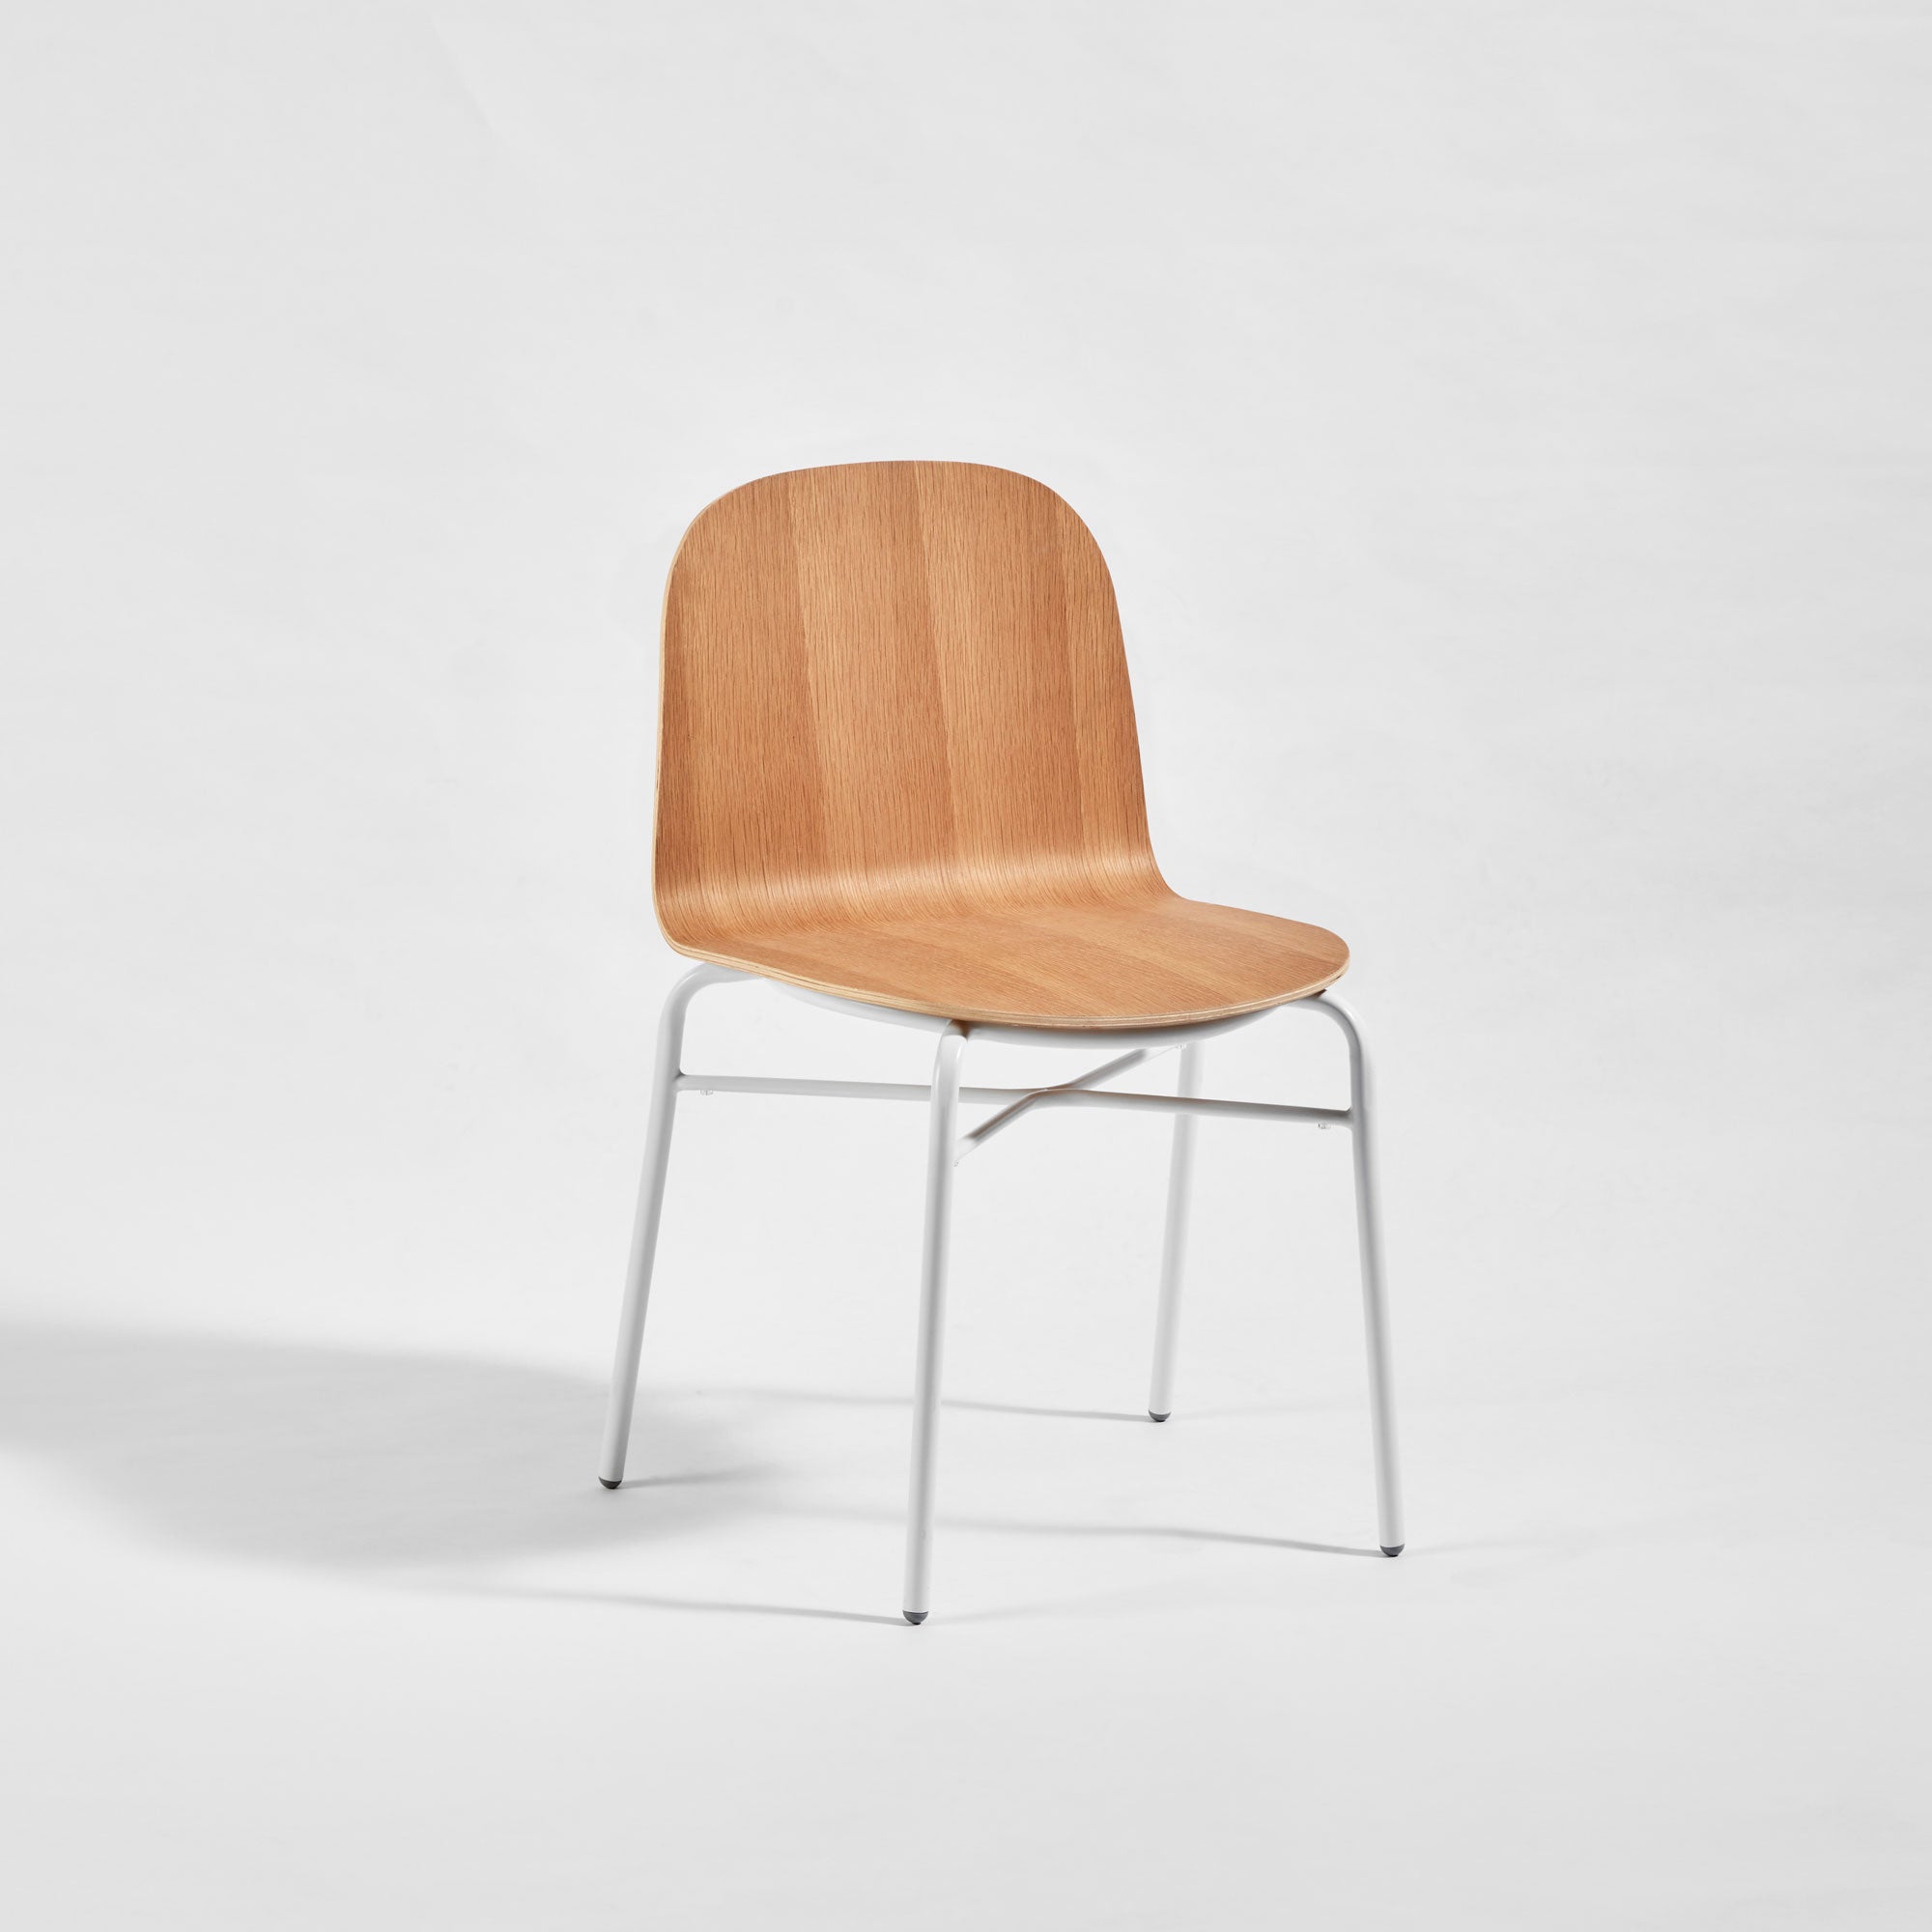 Potato Chair | Stacking Timber & Upholstered Dining Office Chair with Handle | GibsonKarlo | DesignByThem 